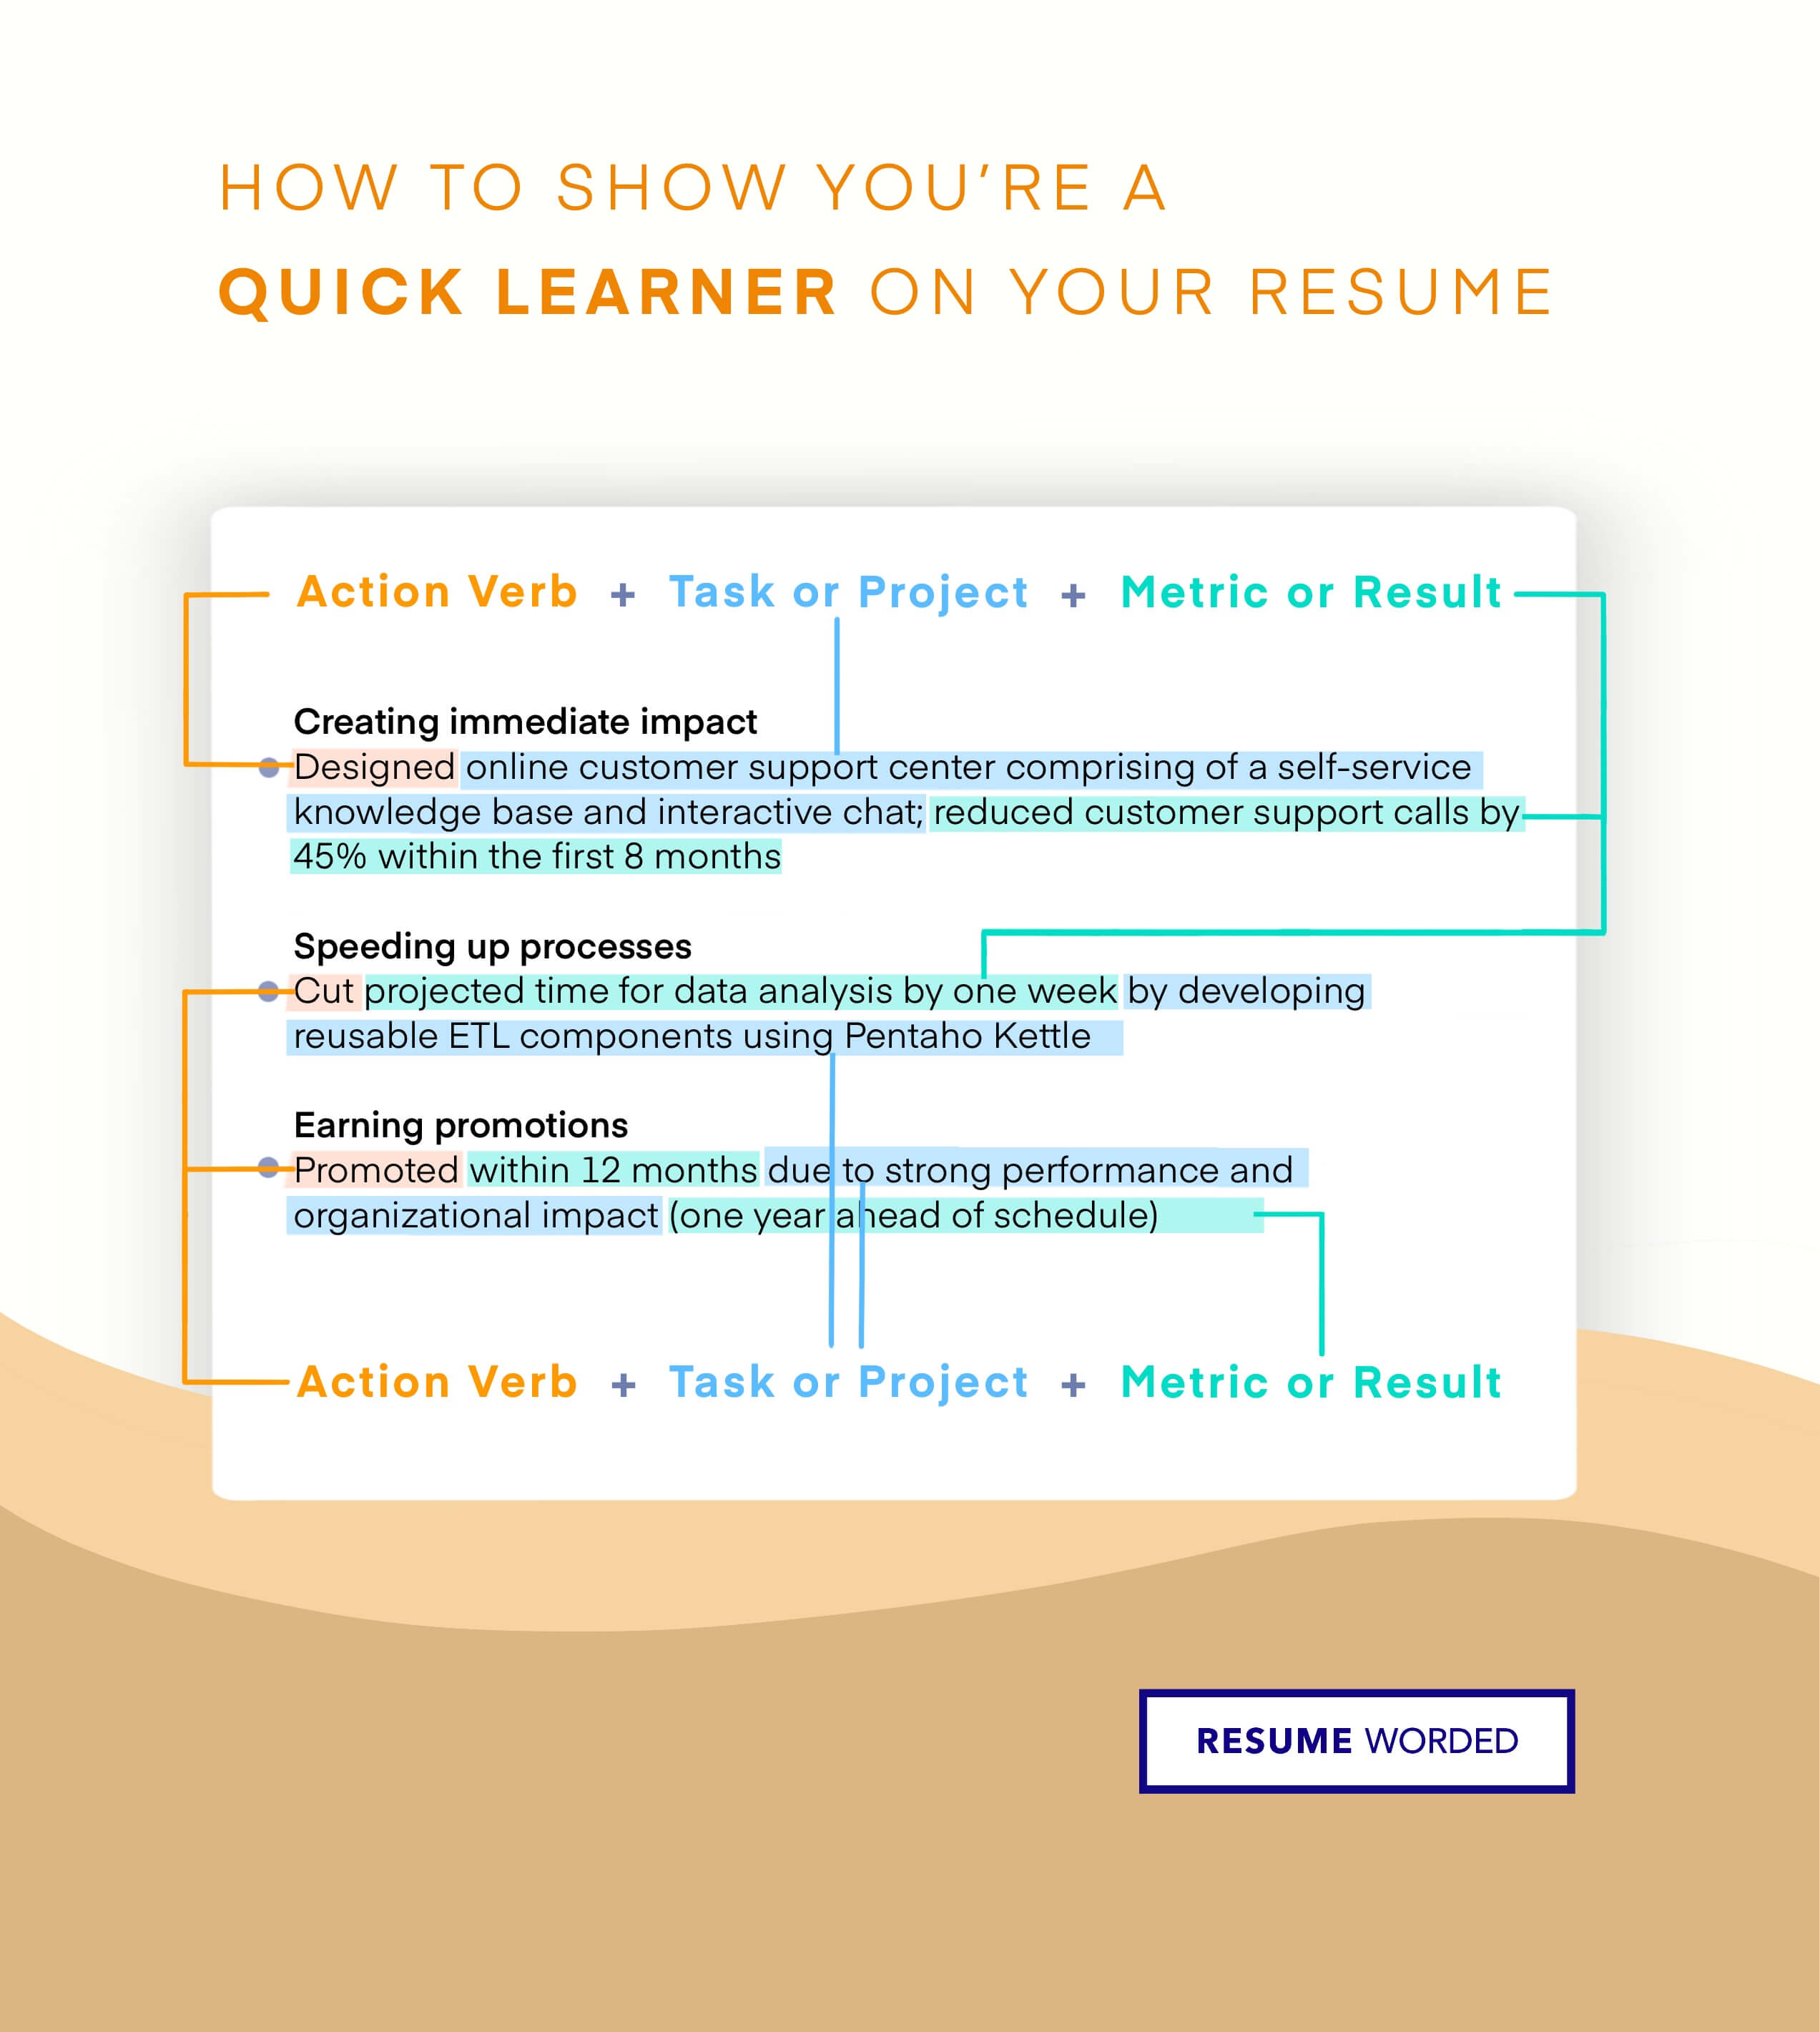 How To Say You're a Quick Learner on Your Resume